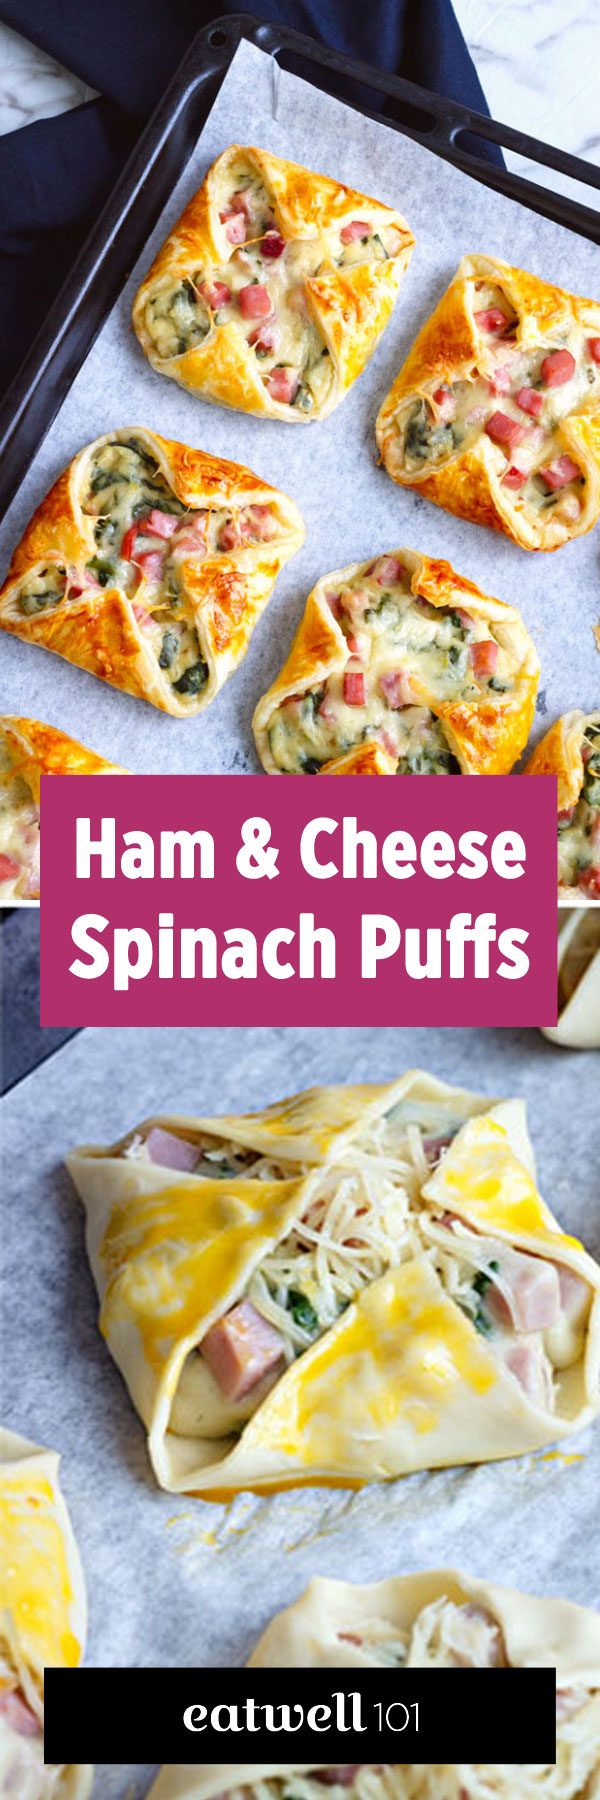 Ham Cheese & Spinach Puffs - #appetizer #recipe #eatwell101 -  Wow your guests for your next brunch at home with these crisp and melty bites.